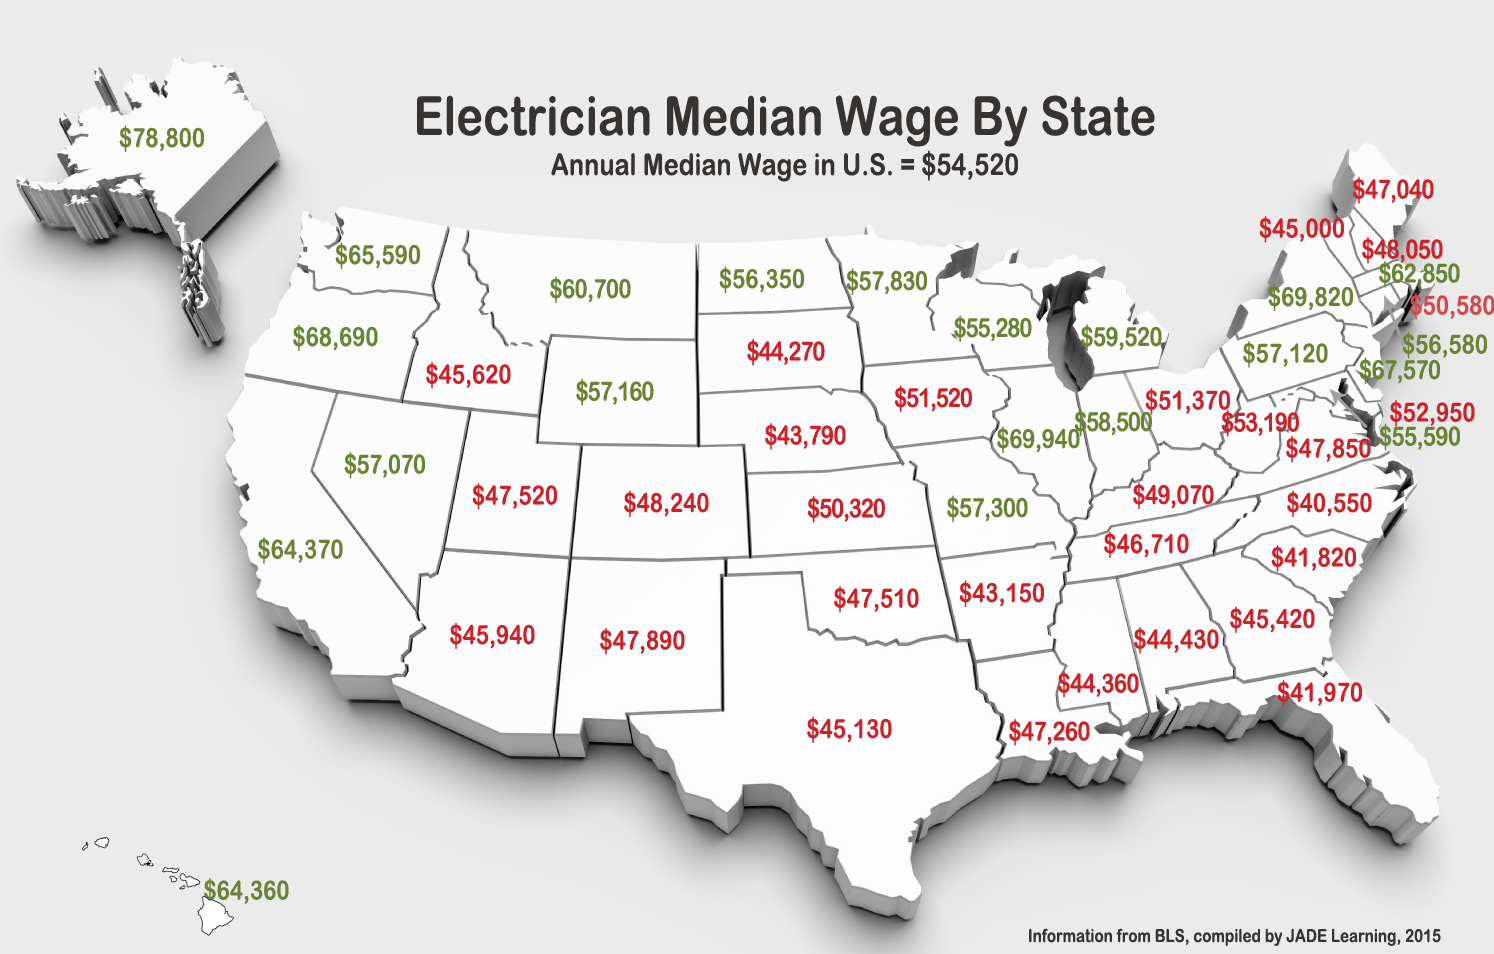 How much are the average earnings for an electrician job